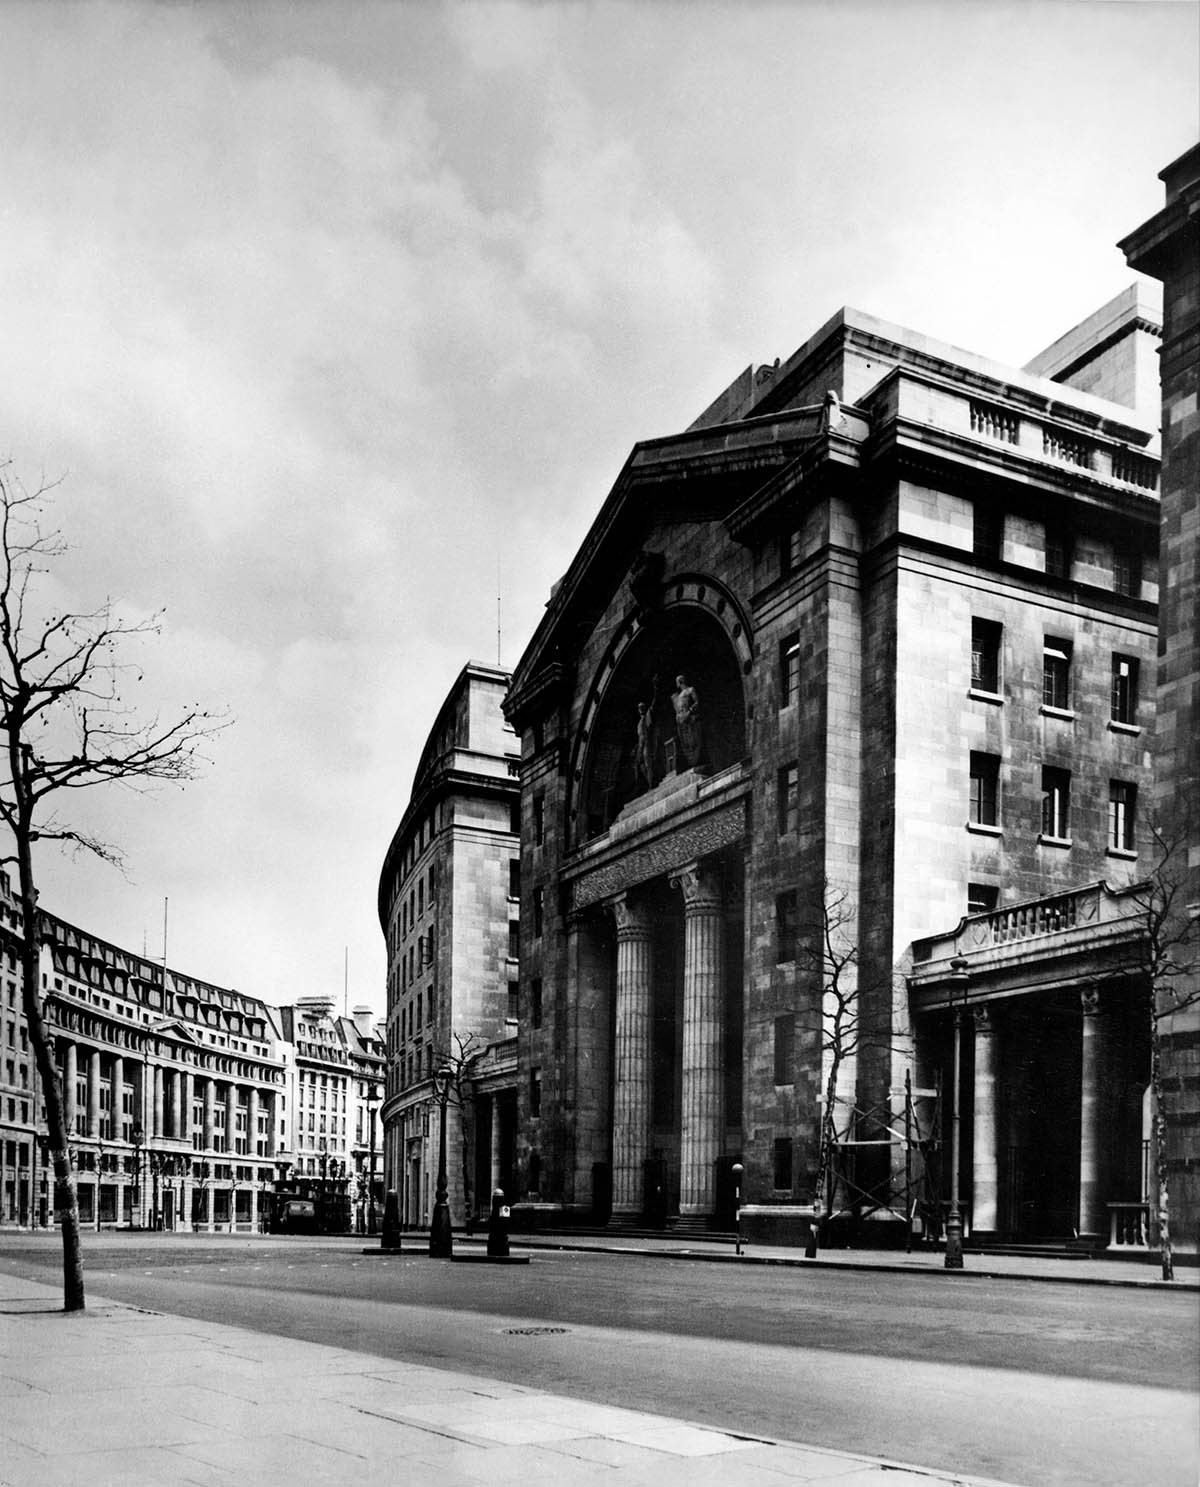 This picture shows the exterior of Bush House in London, with its Corinthian Columns, and statues of Ariel and Prospero.